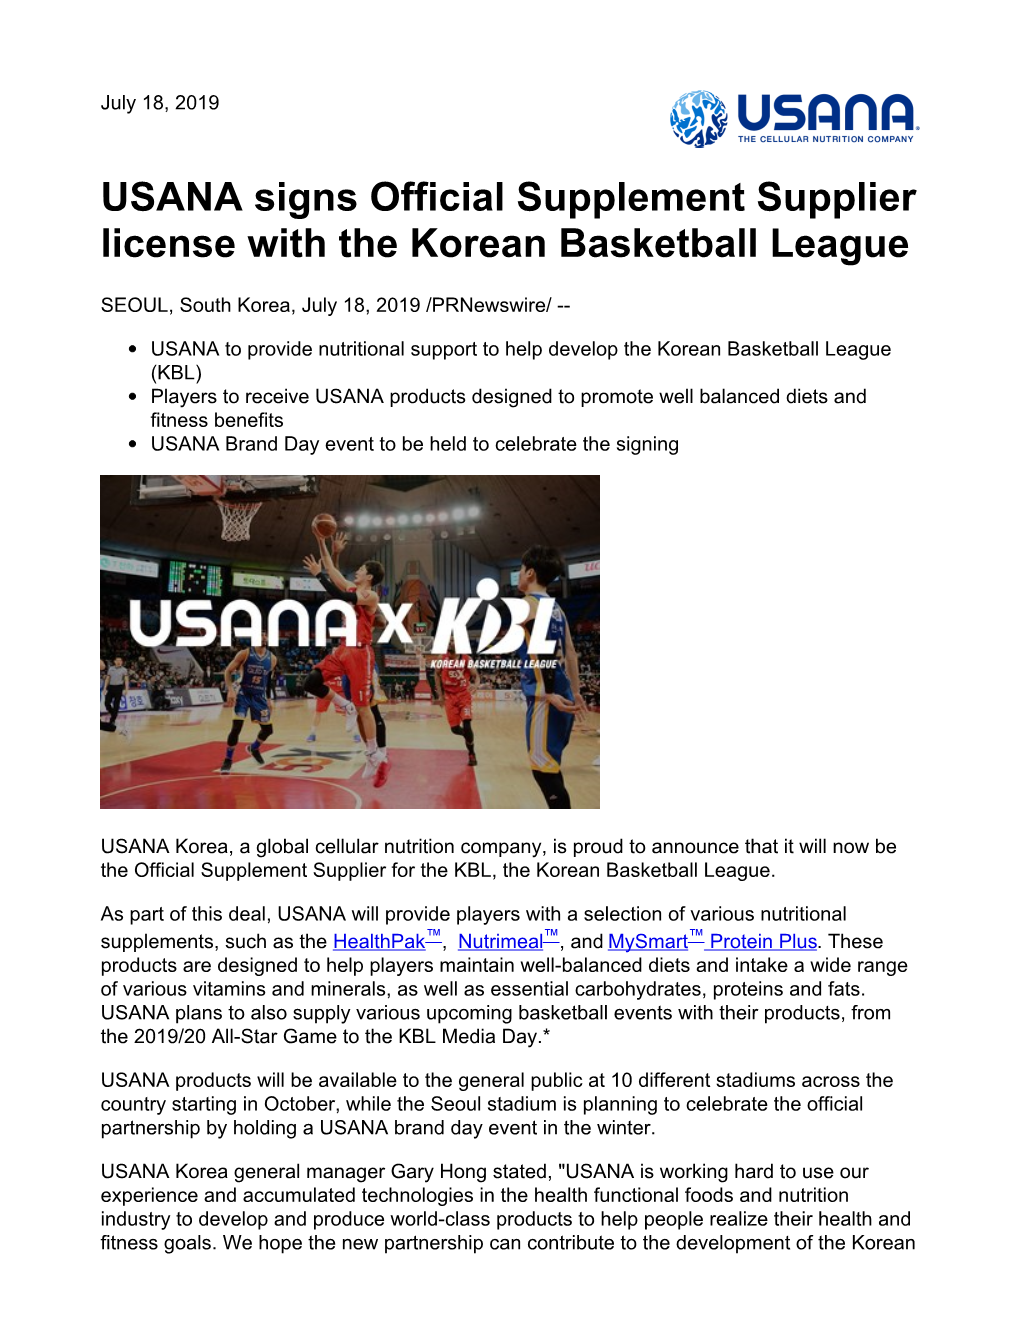 USANA Signs Official Supplement Supplier License with the Korean Basketball League